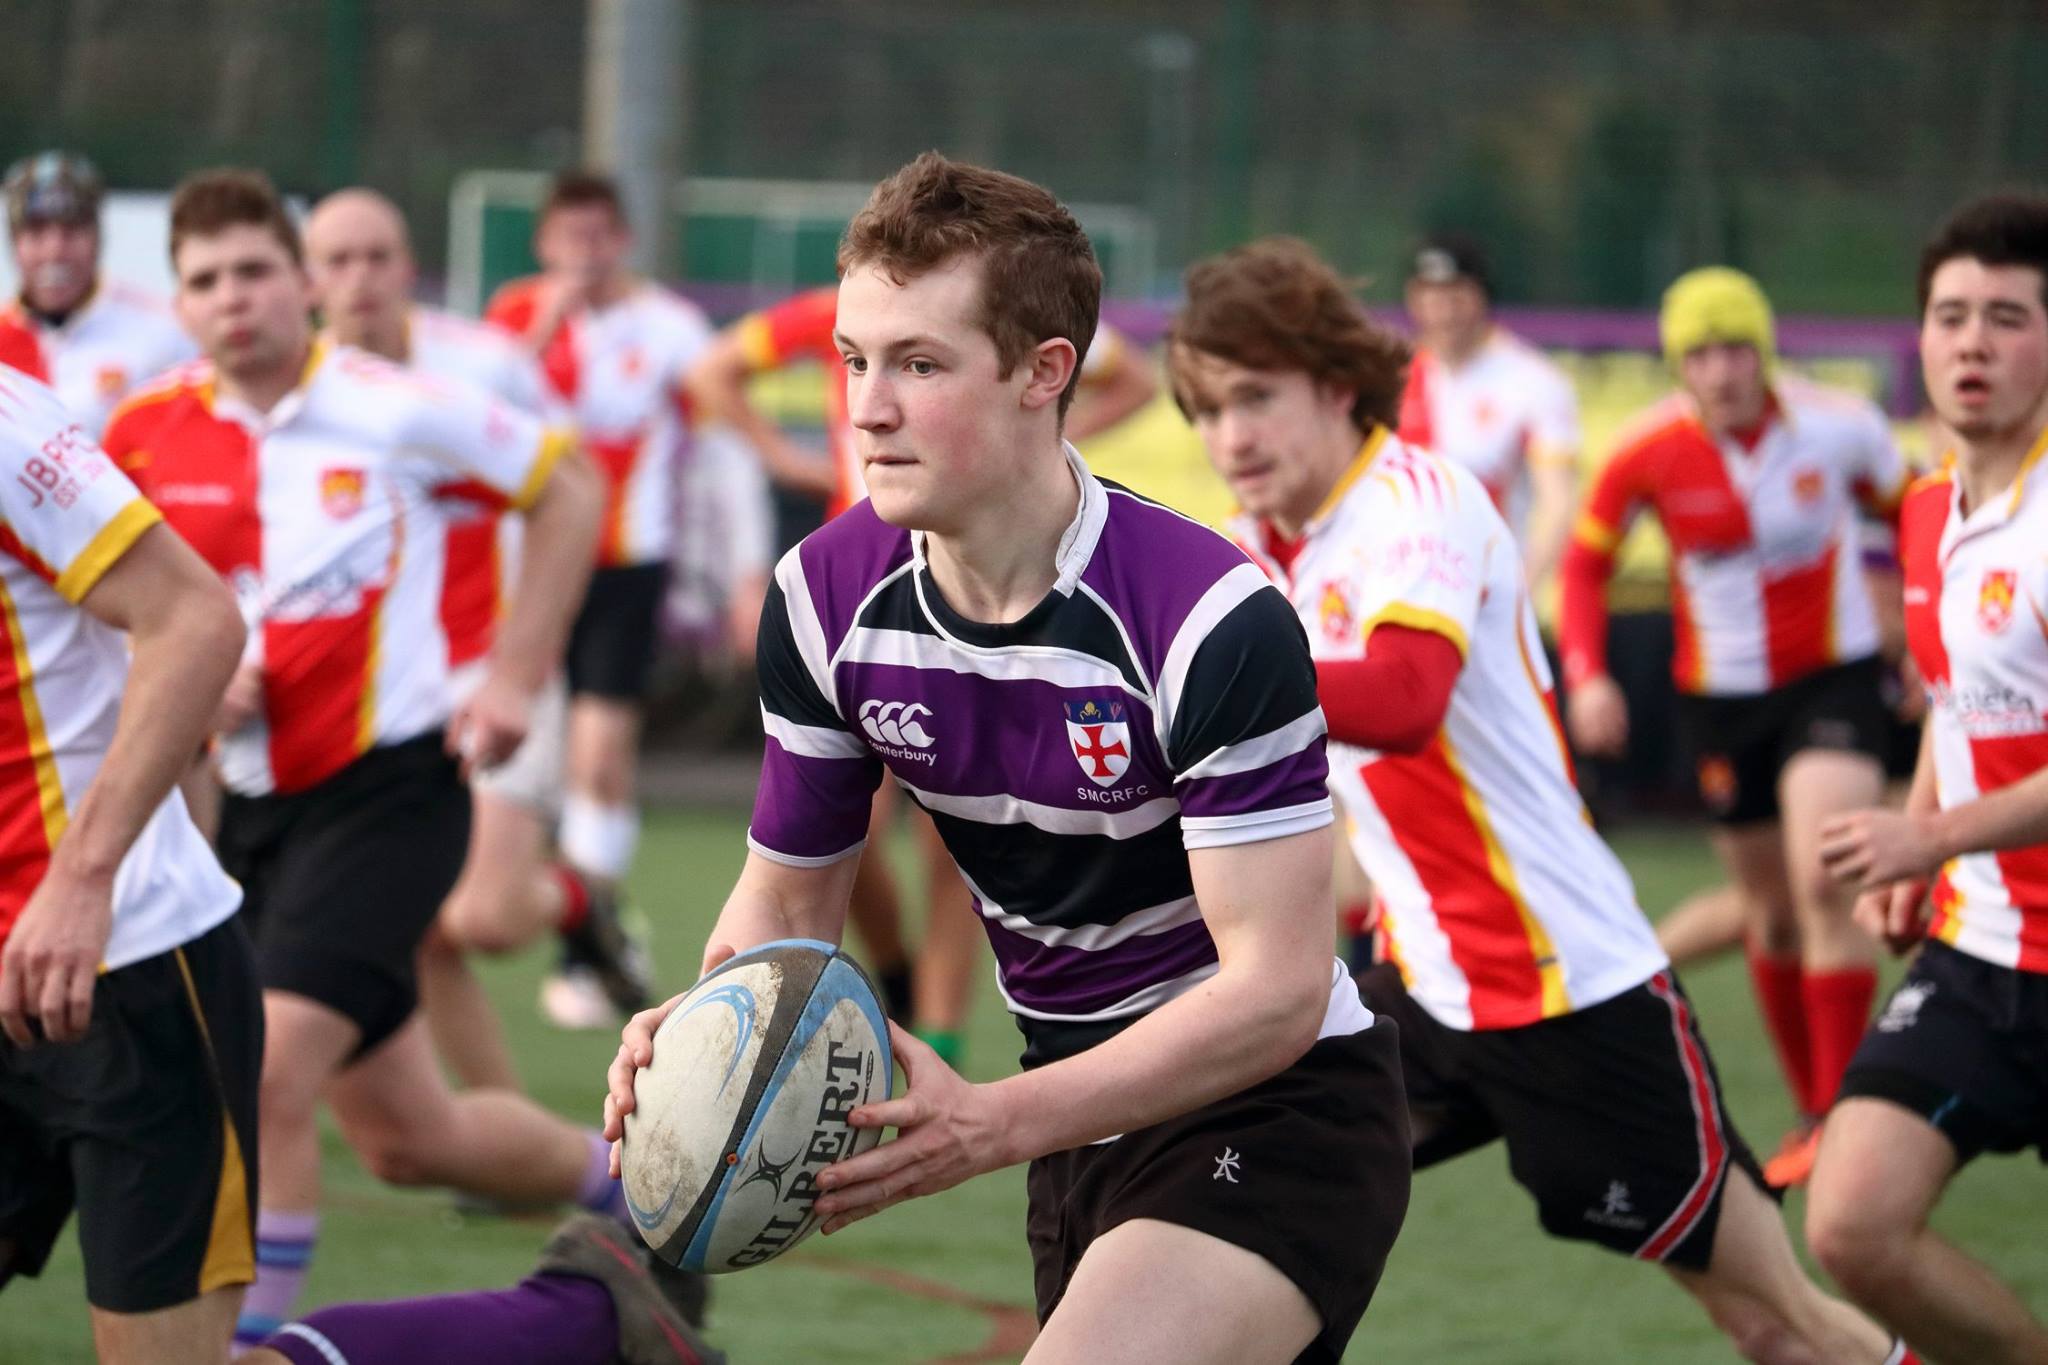 St Marys student playing rugby